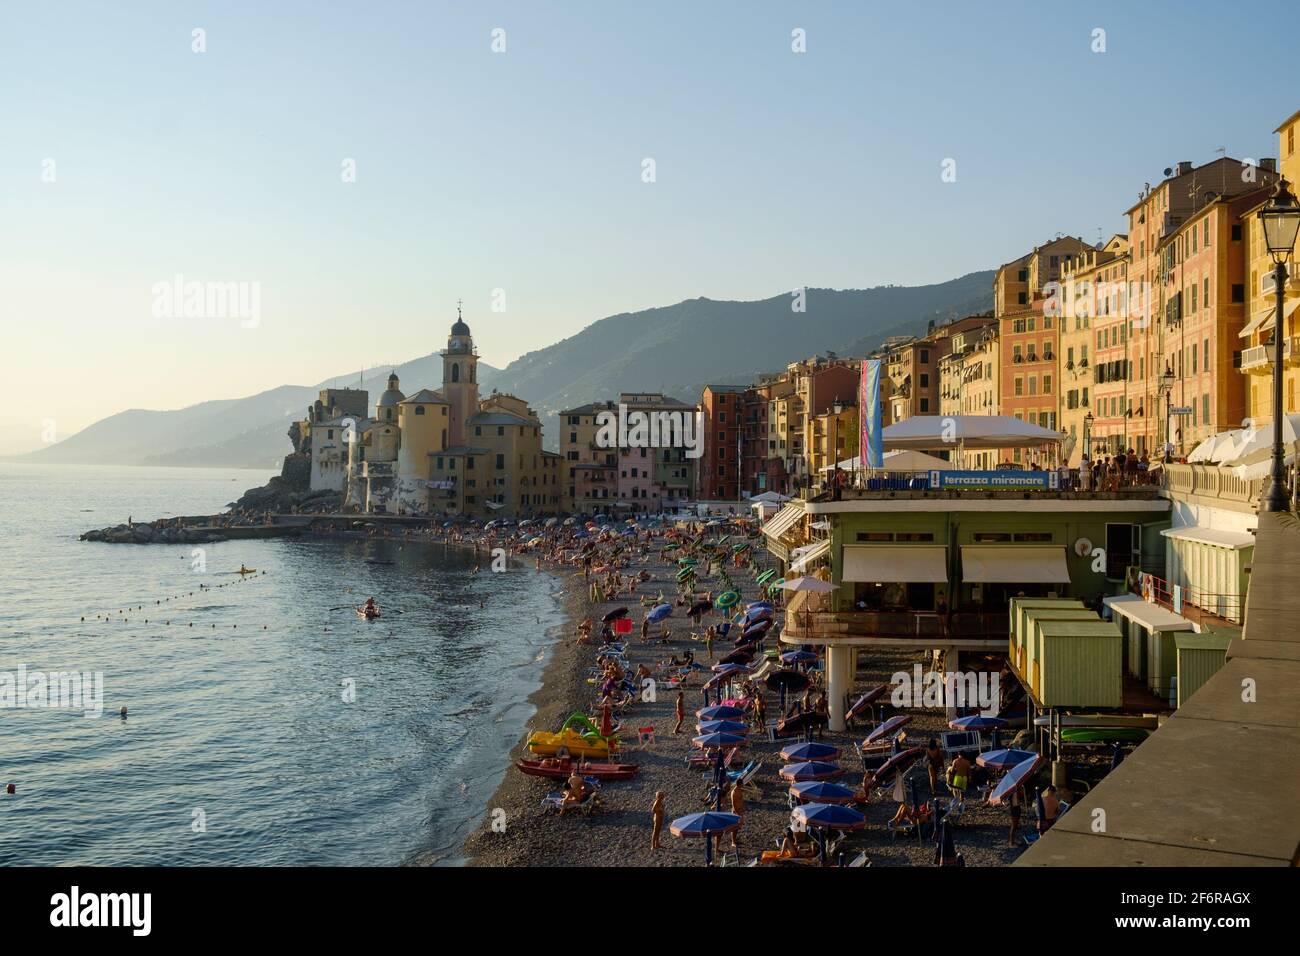 Many people enjoy the beach of Camogli during a sunny summer day .The beach is surrounded by colorful facades and the basilica in the background. Stock Photo